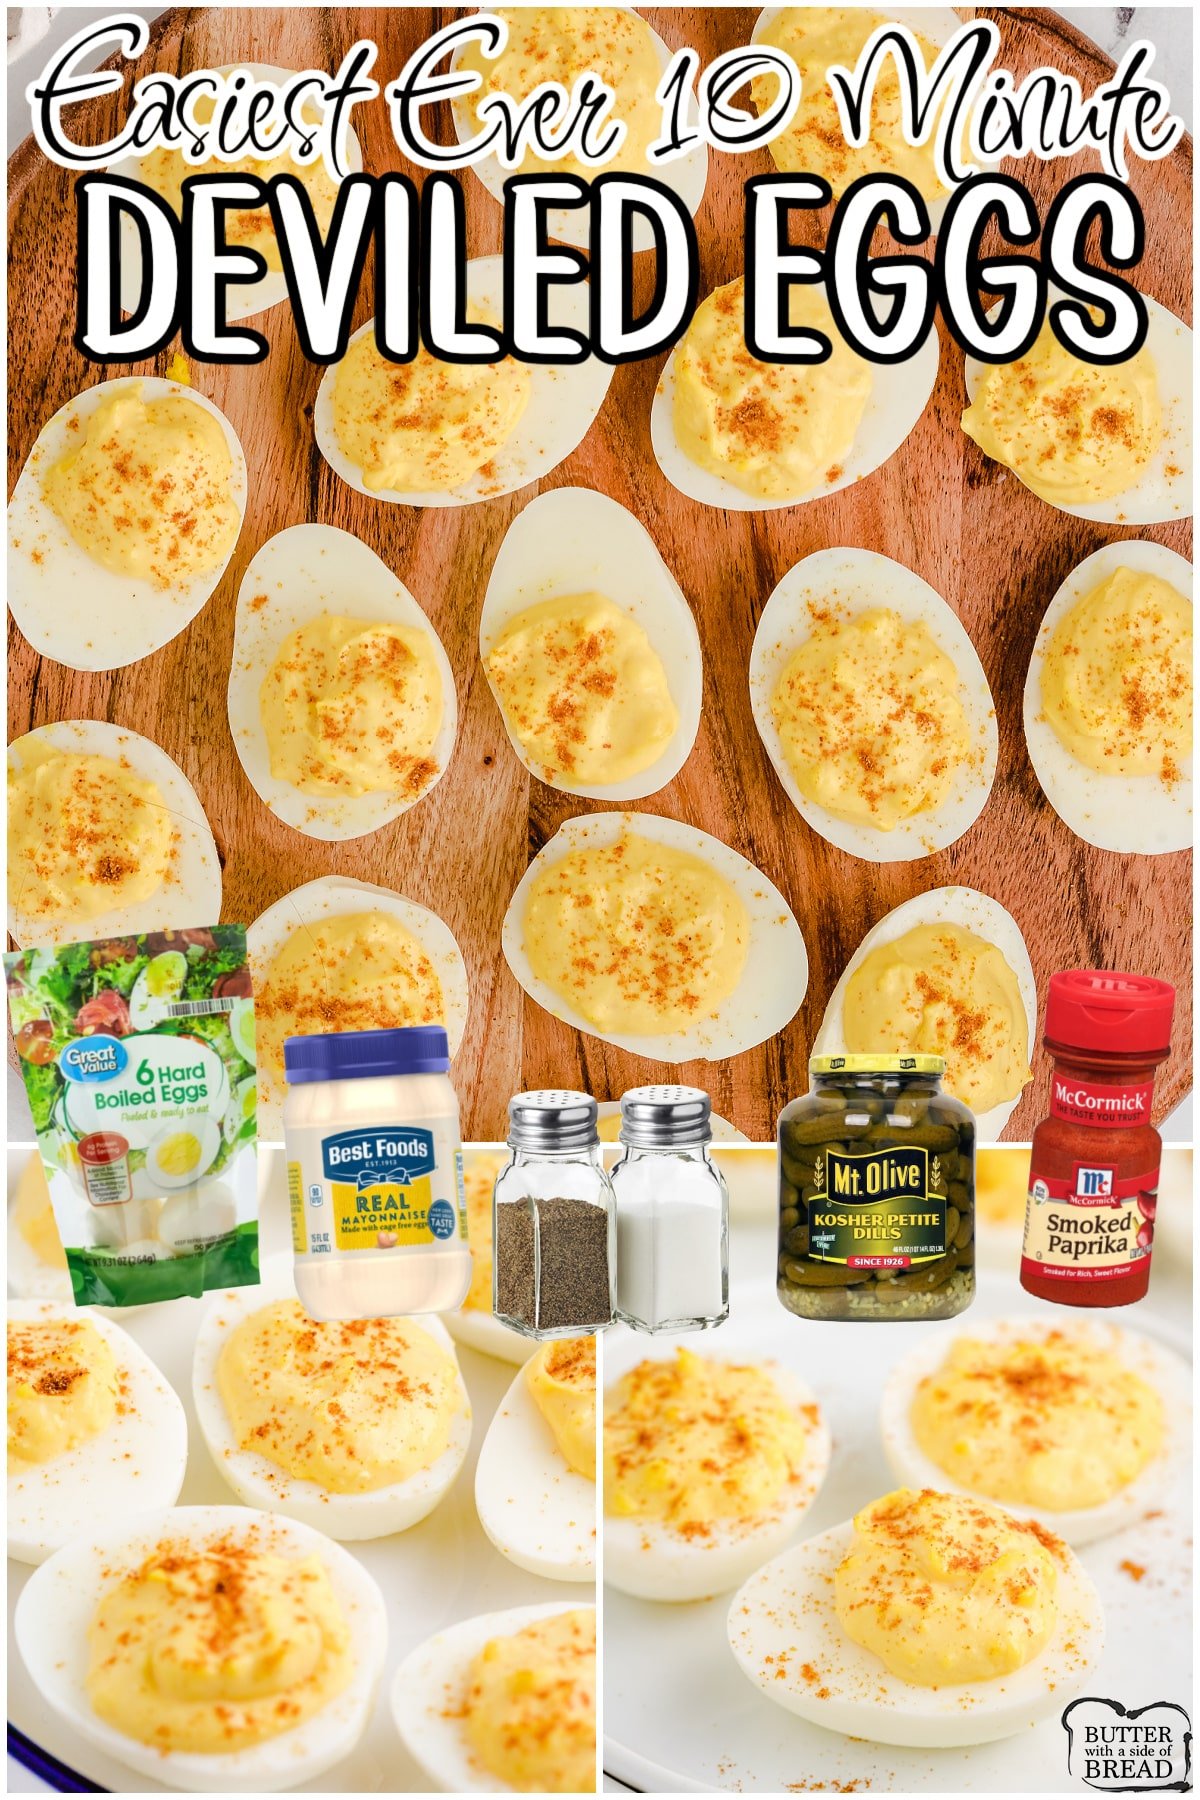 Simple recipe for the absolute EASIEST Deviled Eggs EVER! I've been making them this way for years, now I'm sharing all my time saving secrets! Enjoy deviled eggs in 10 minutes flat!